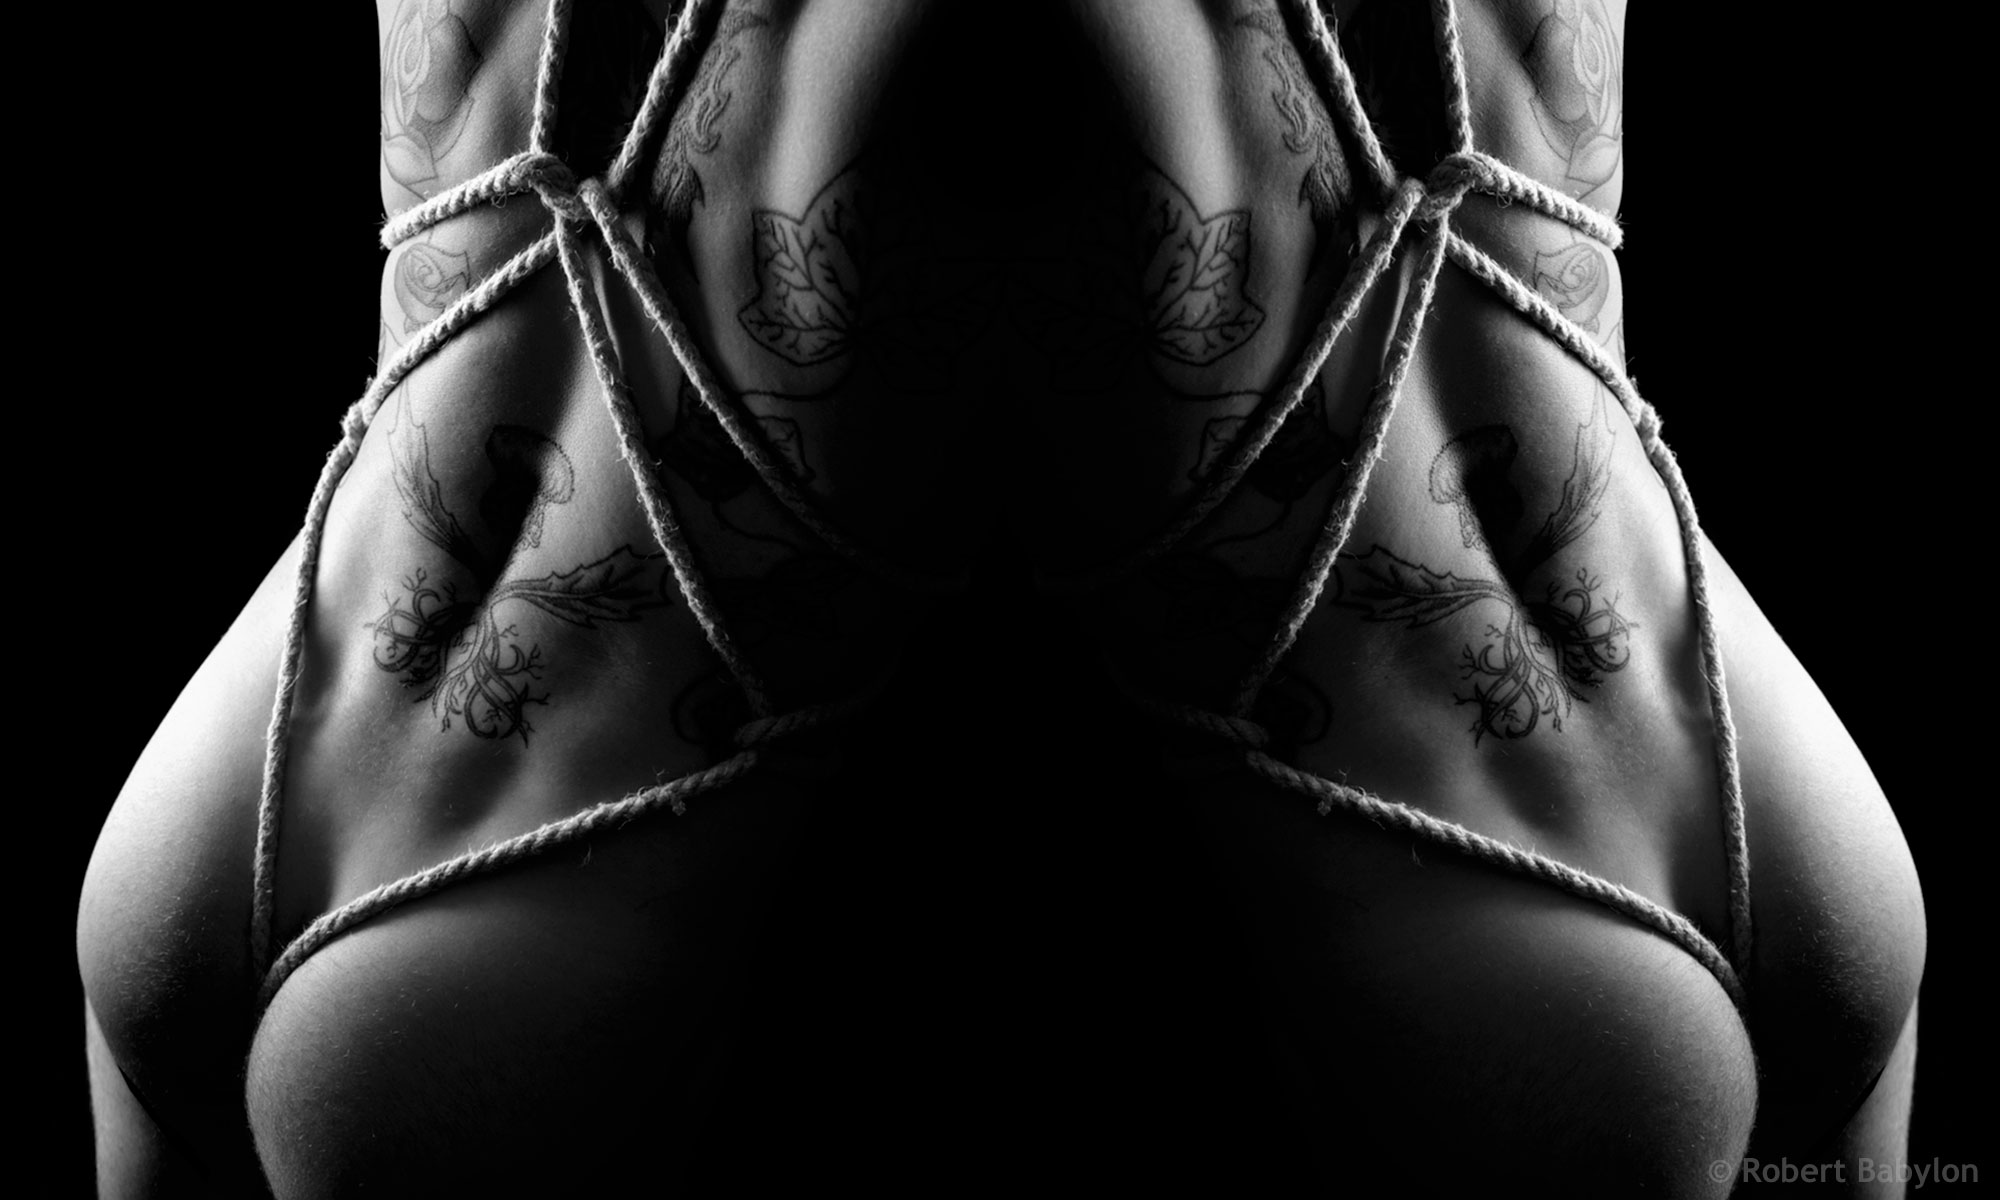 Erotic abstract photography